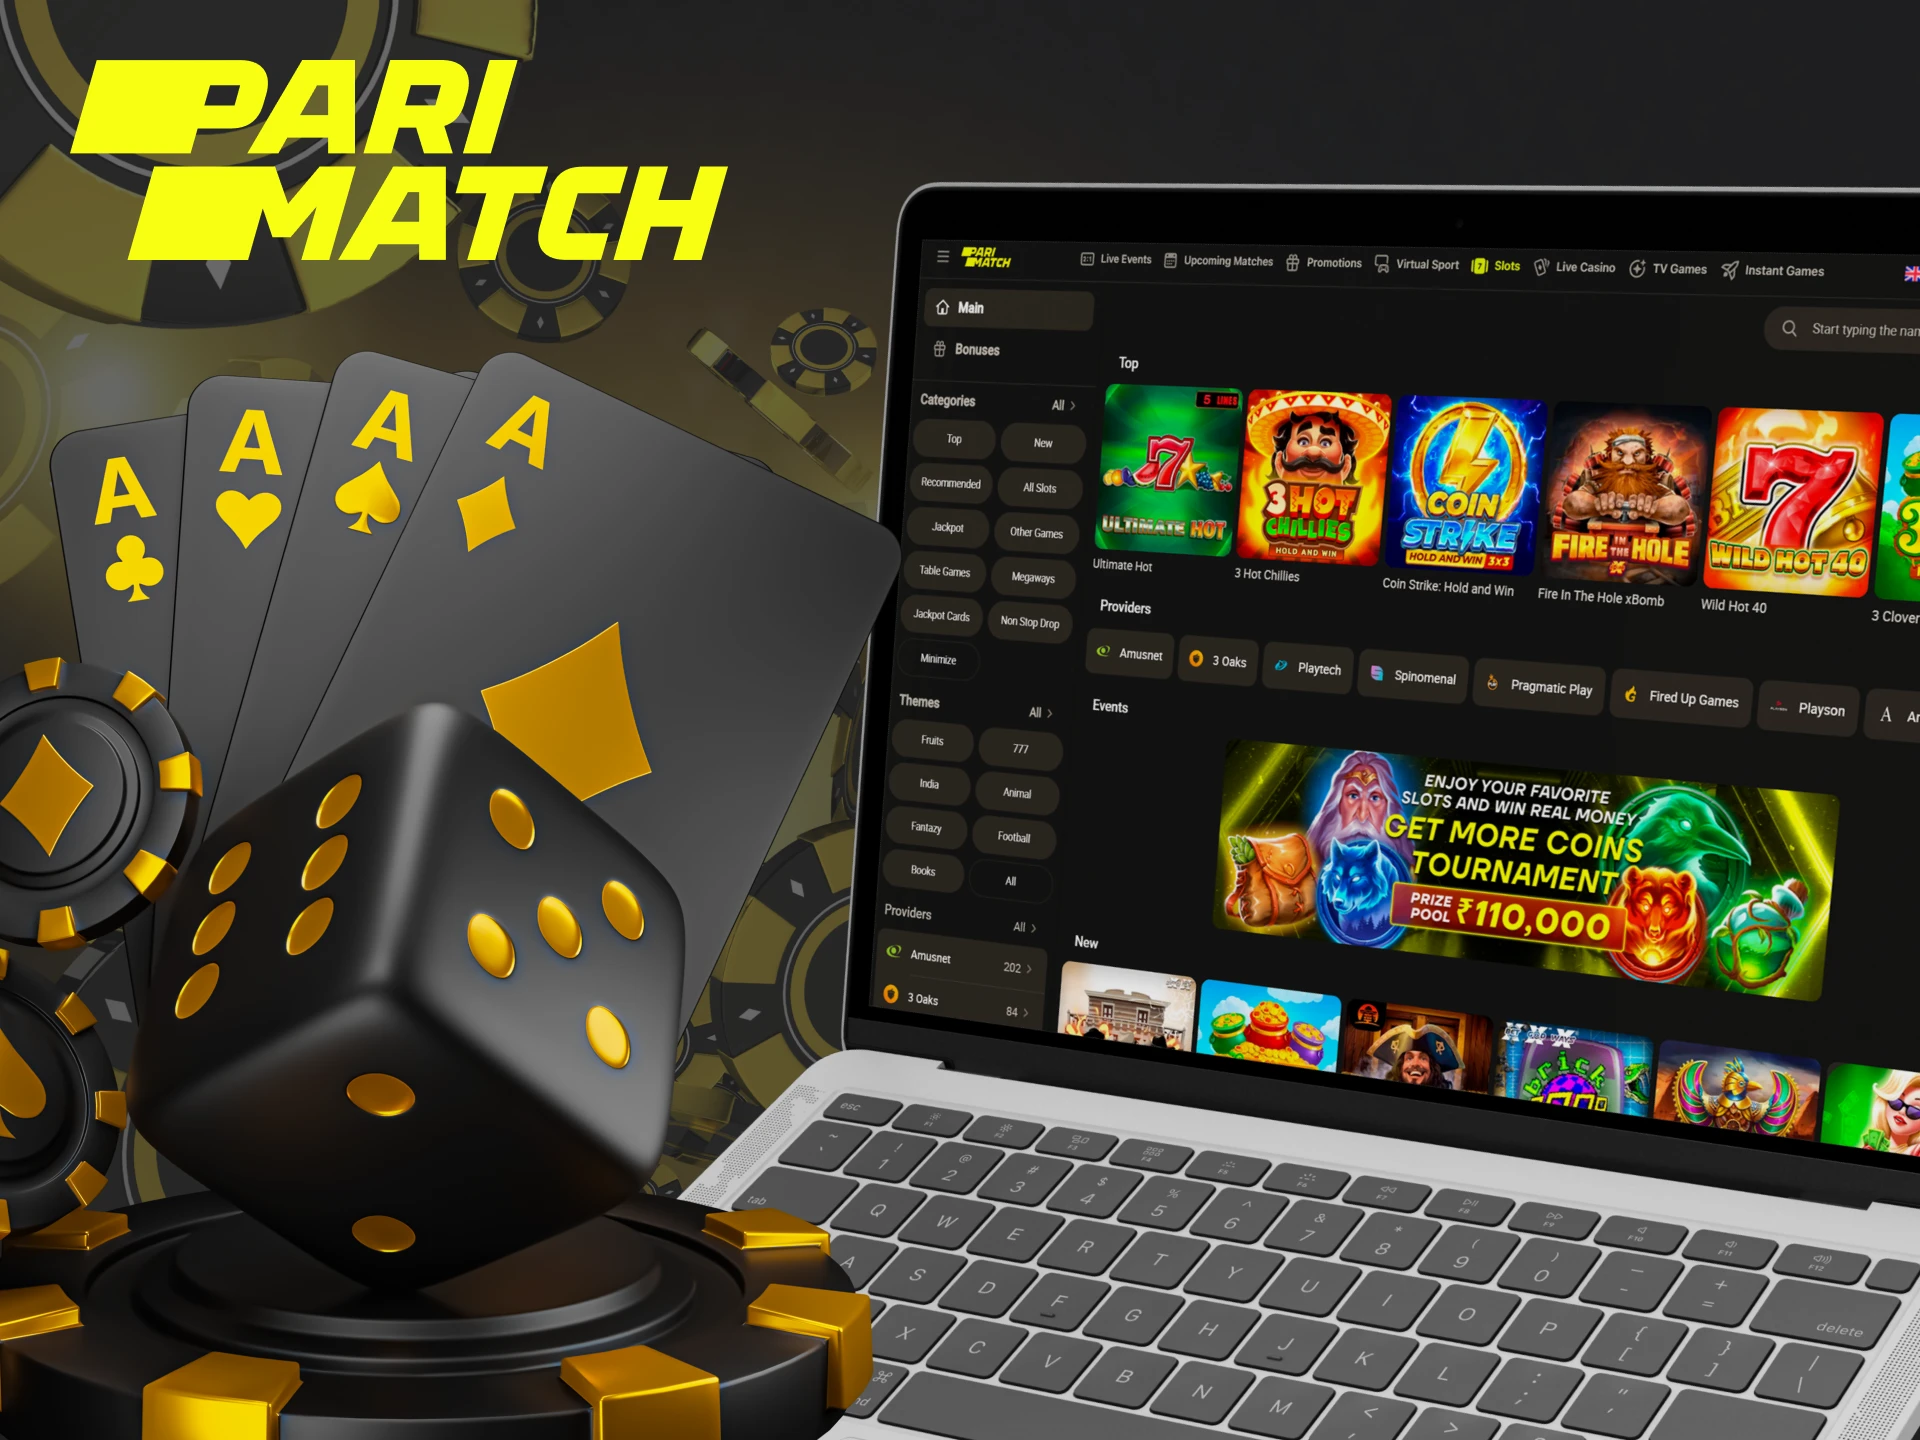 Play your favorite casino games at Parimatch.